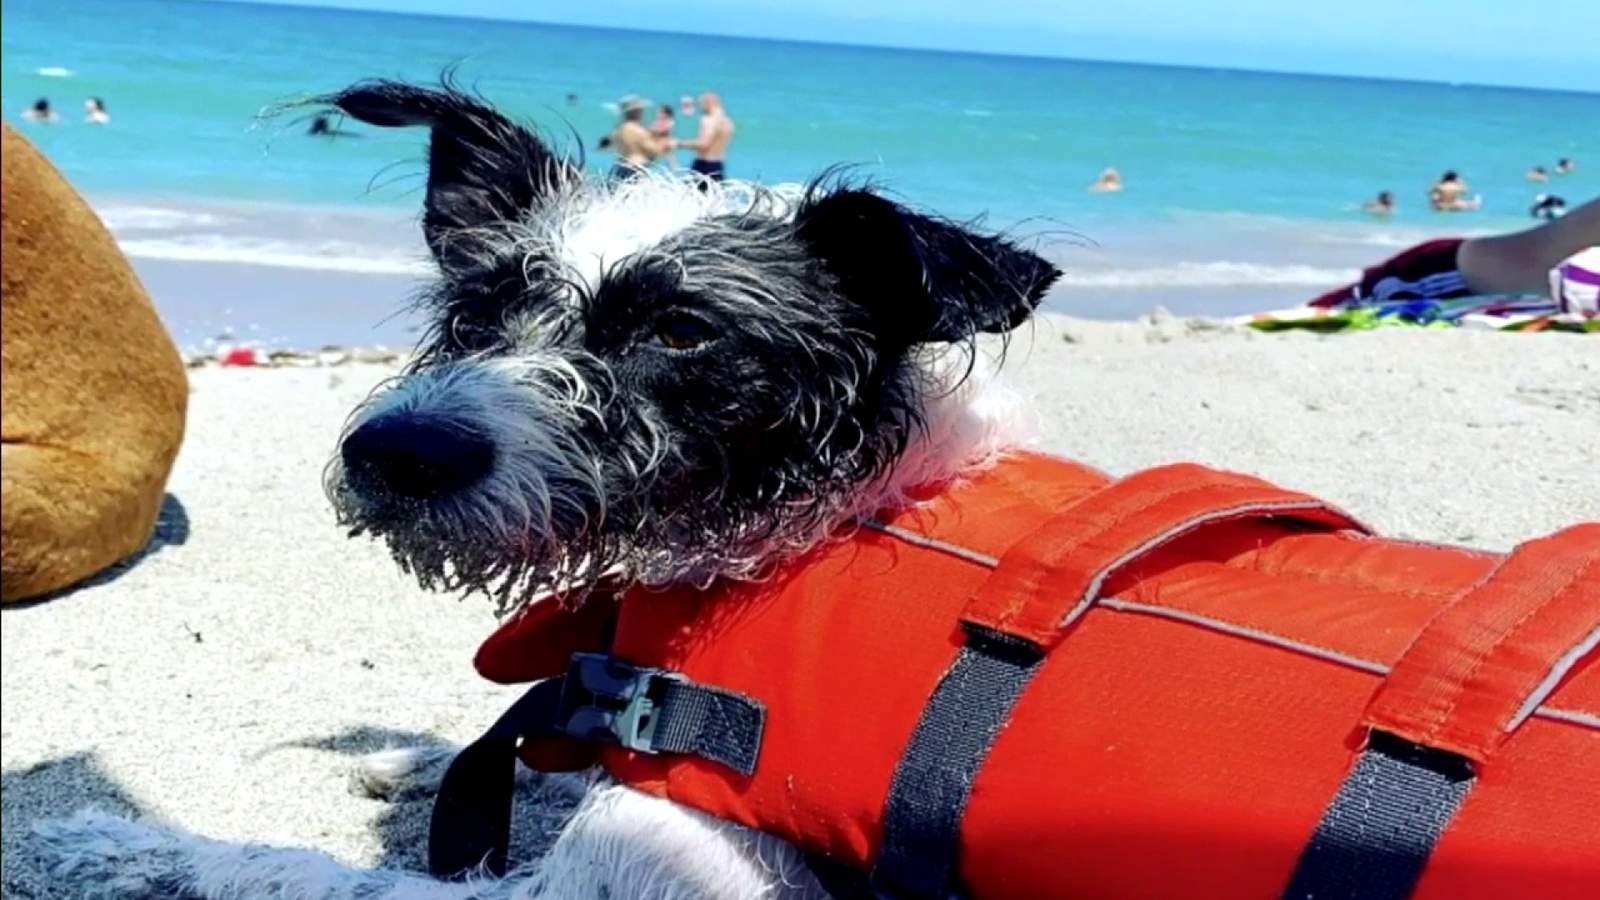 Lucky dog: Owner grateful after saving rescue pup from shark attack off Virginia Key